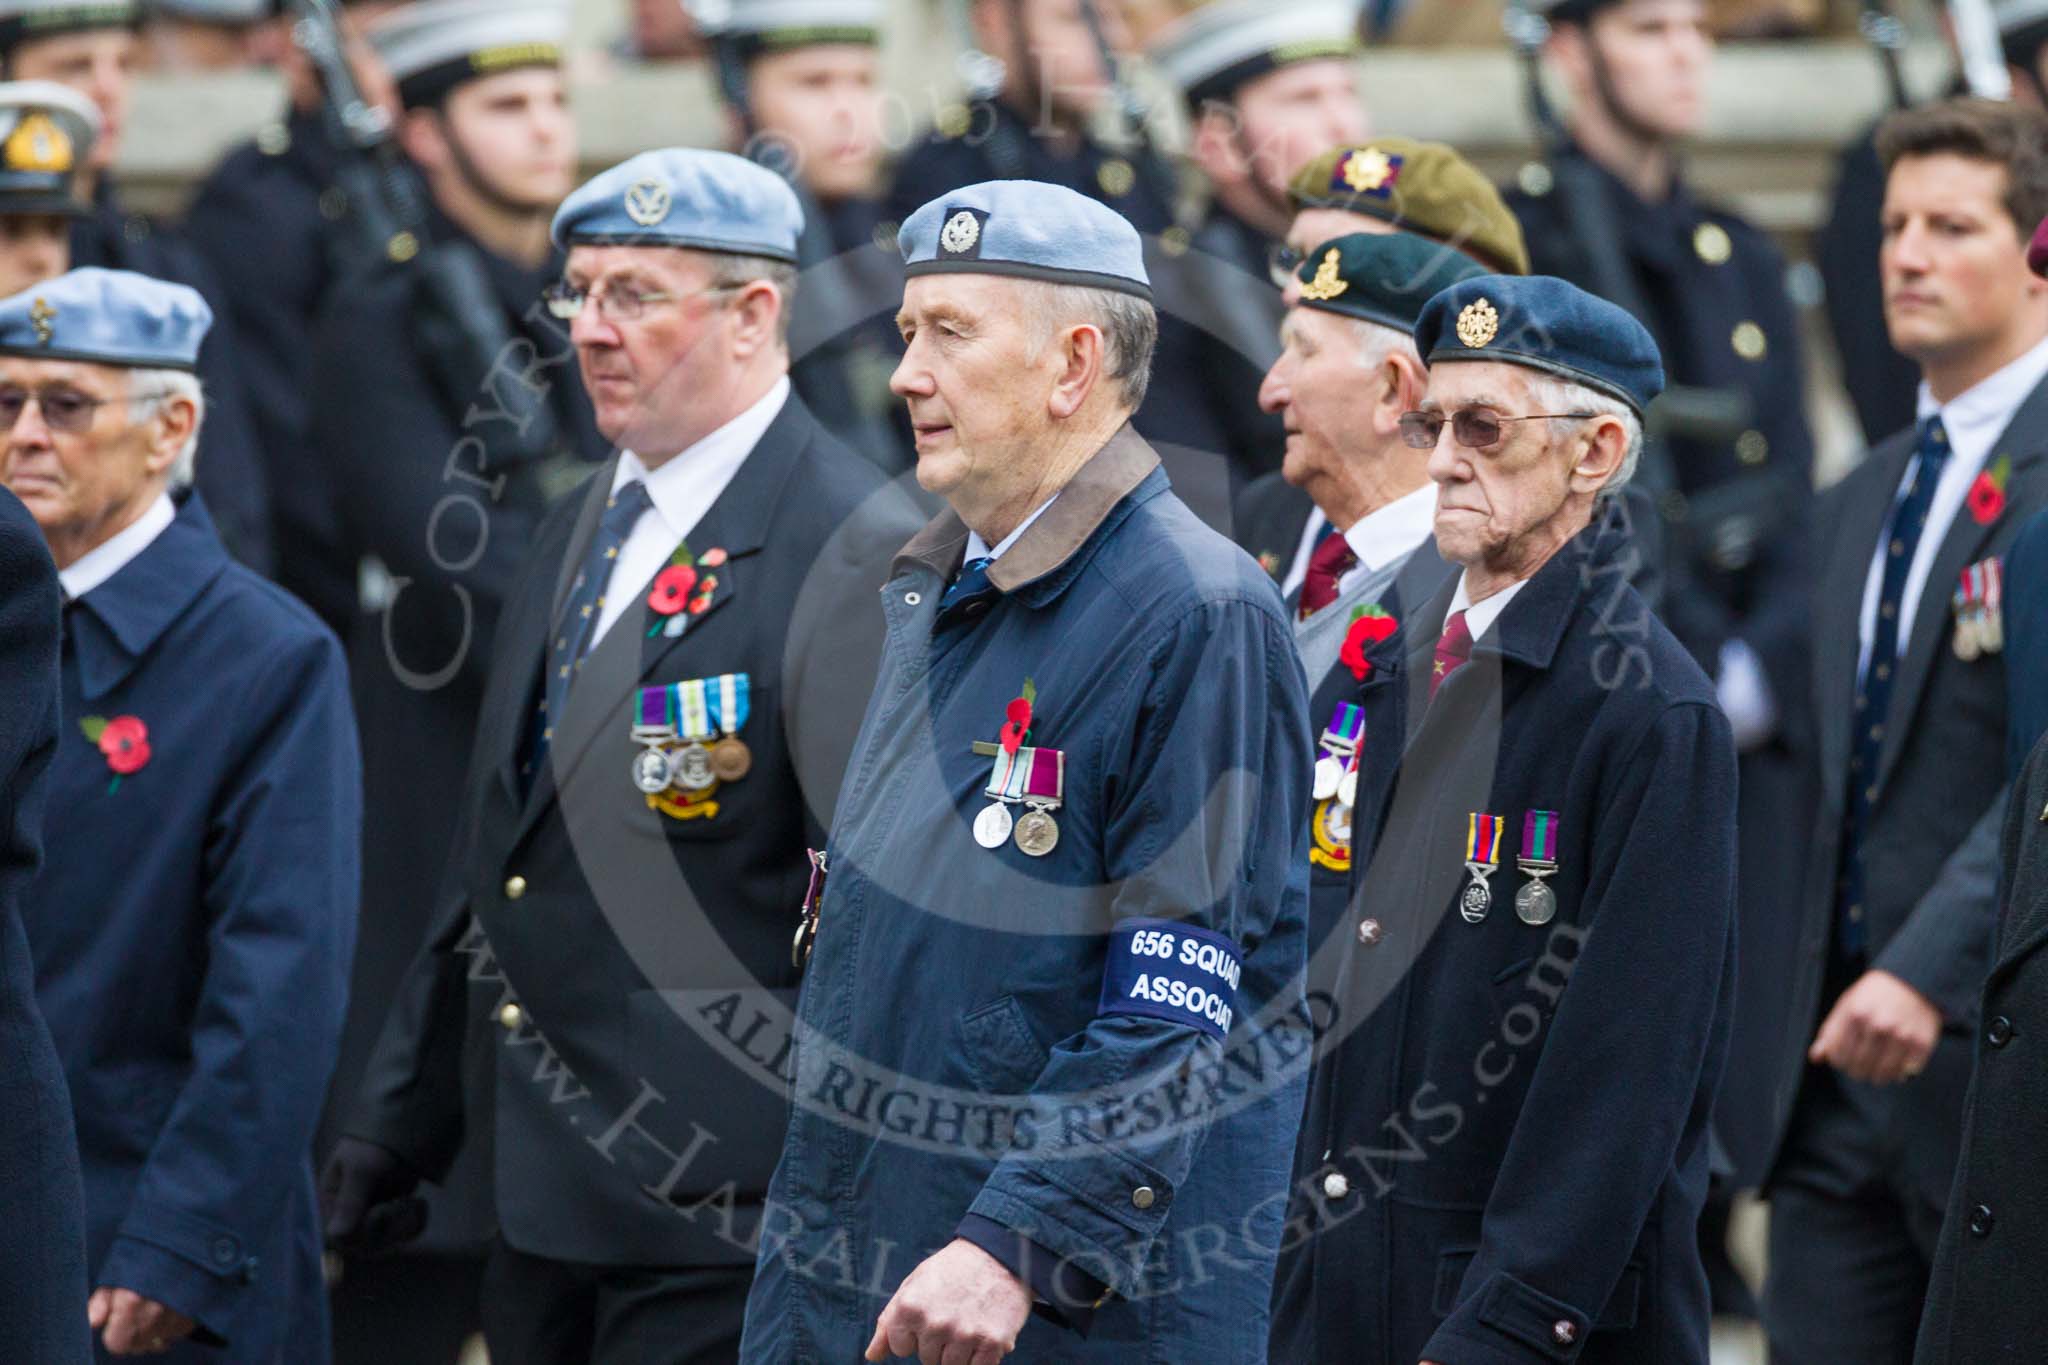 Remembrance Sunday at the Cenotaph 2015: Group B38, 656 Squadron Association.
Cenotaph, Whitehall, London SW1,
London,
Greater London,
United Kingdom,
on 08 November 2015 at 11:43, image #303